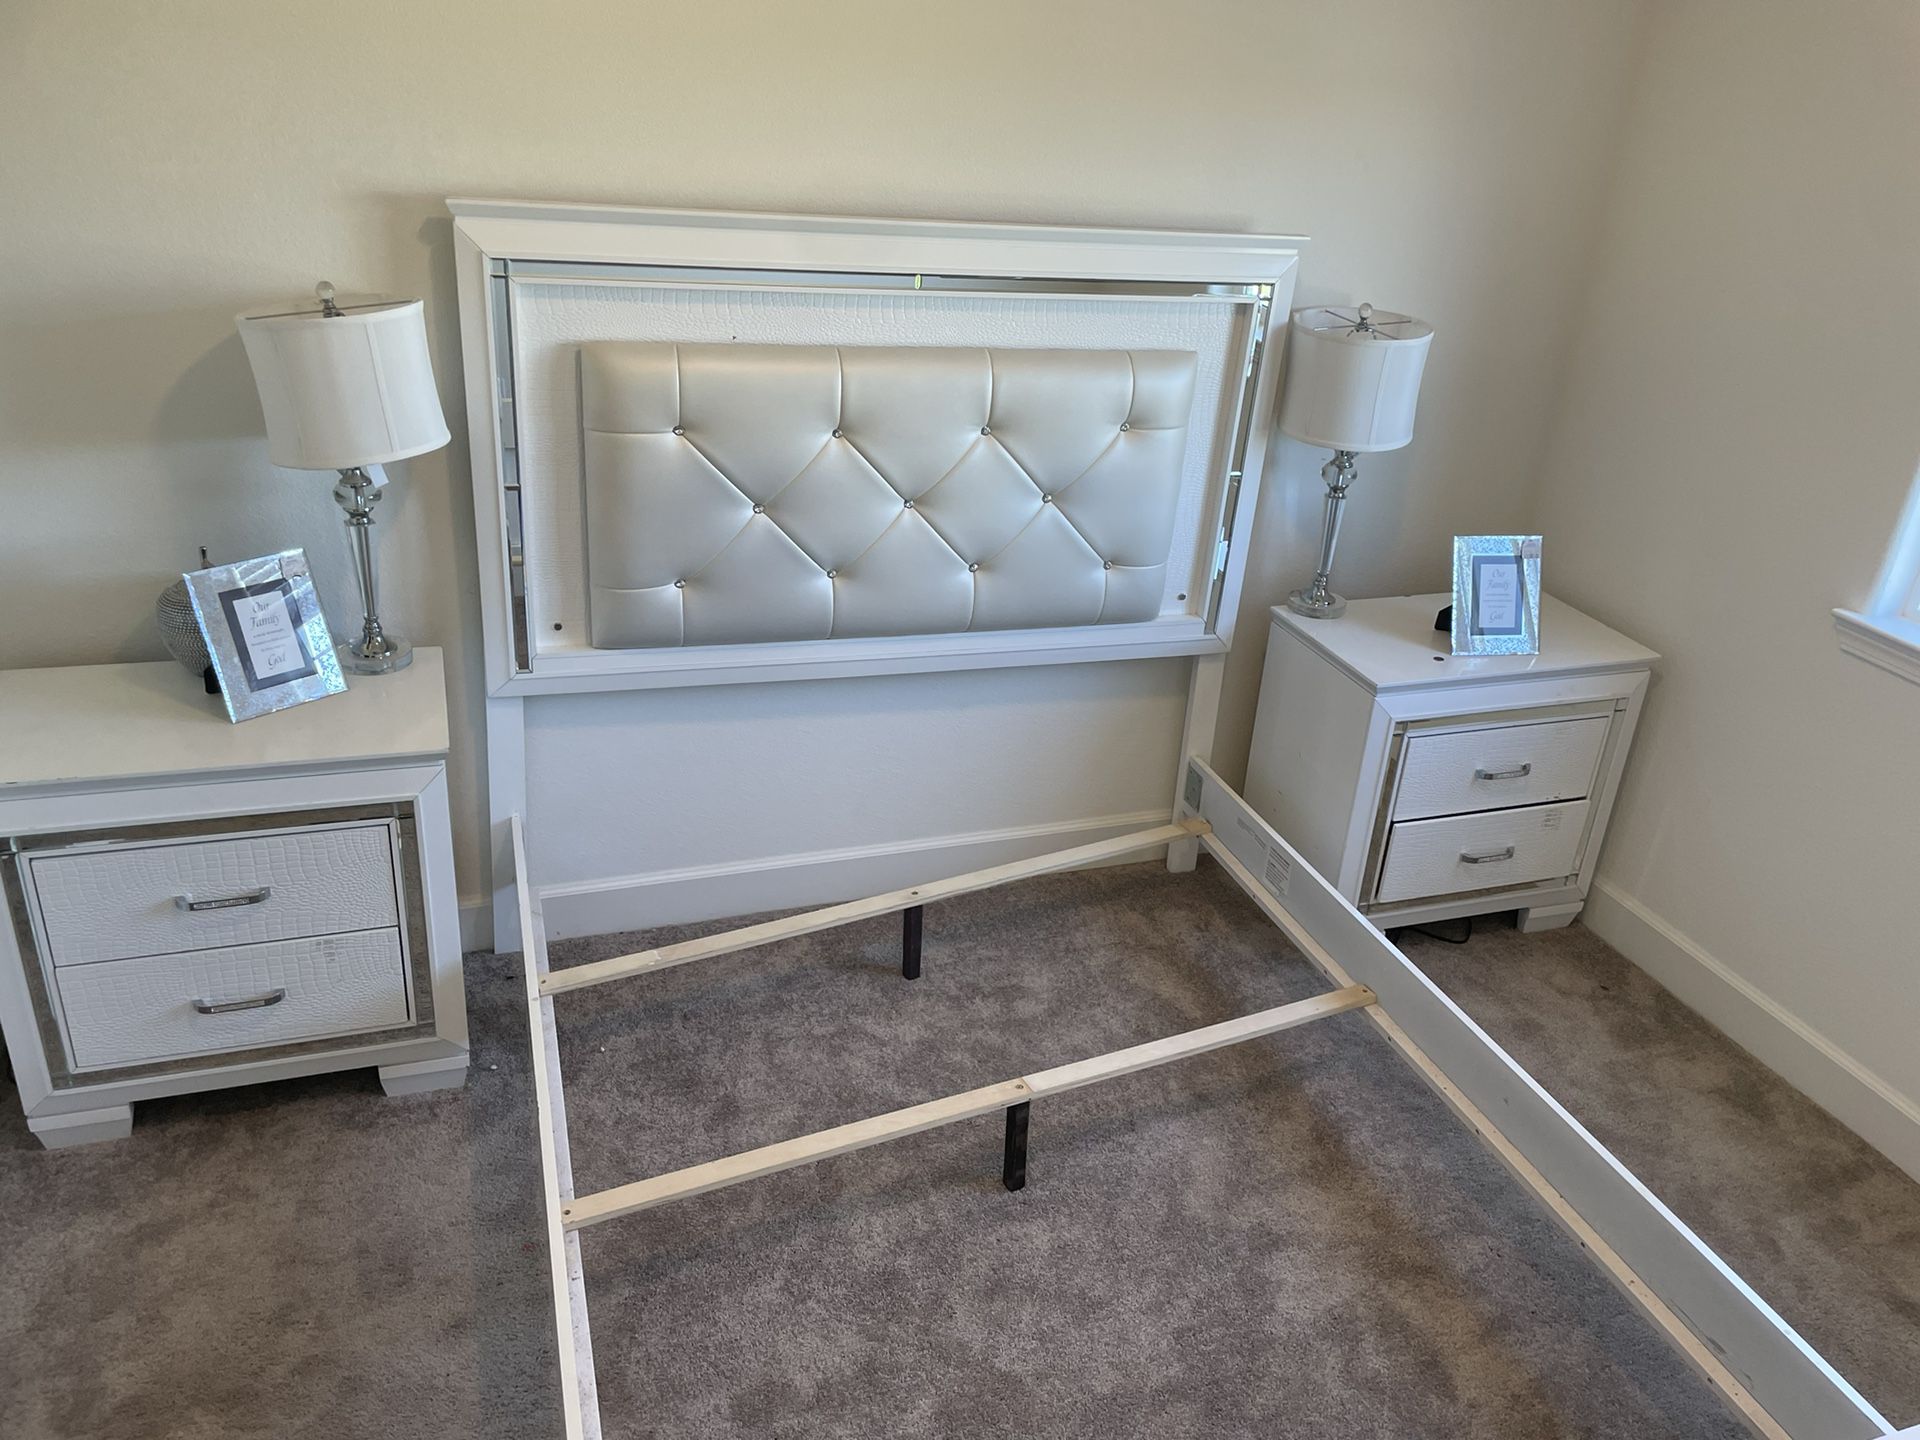 Queen bed Frame With End Tables